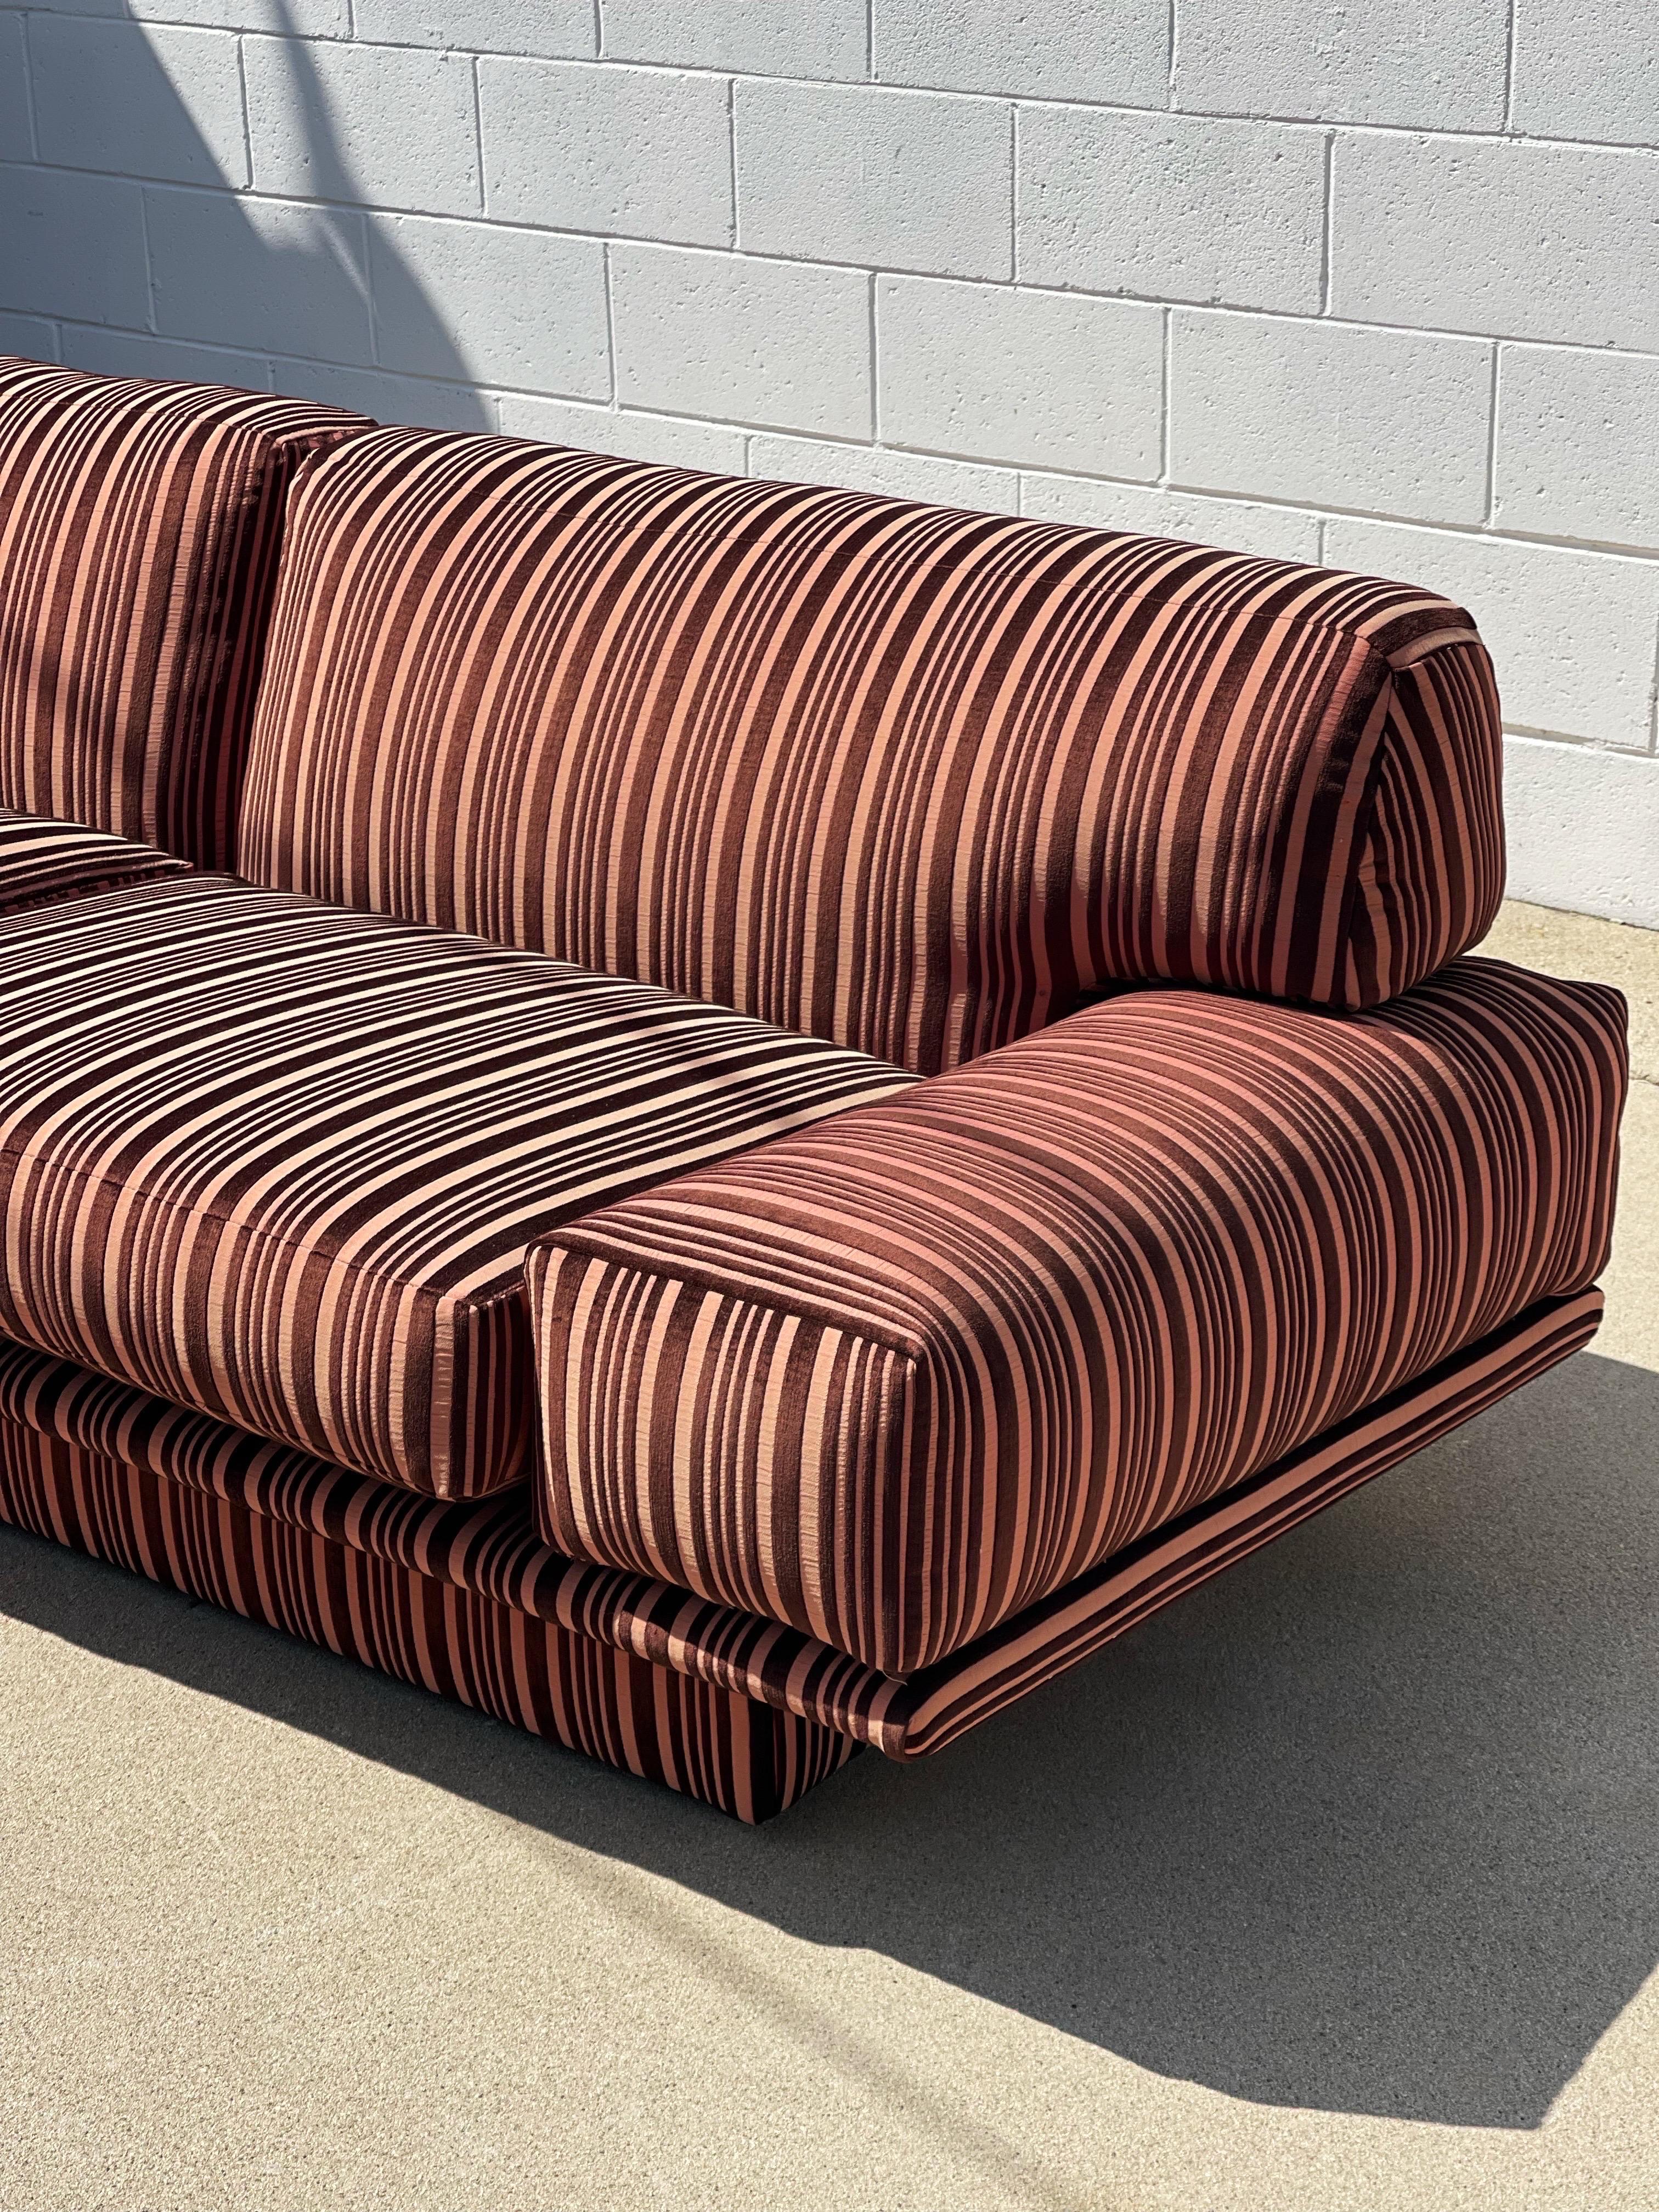 A stunning original 1970s floating frame, newly reupholstered in pink and brown velvet striped fabric. In beautiful, brand new condition ready for another 40 years.